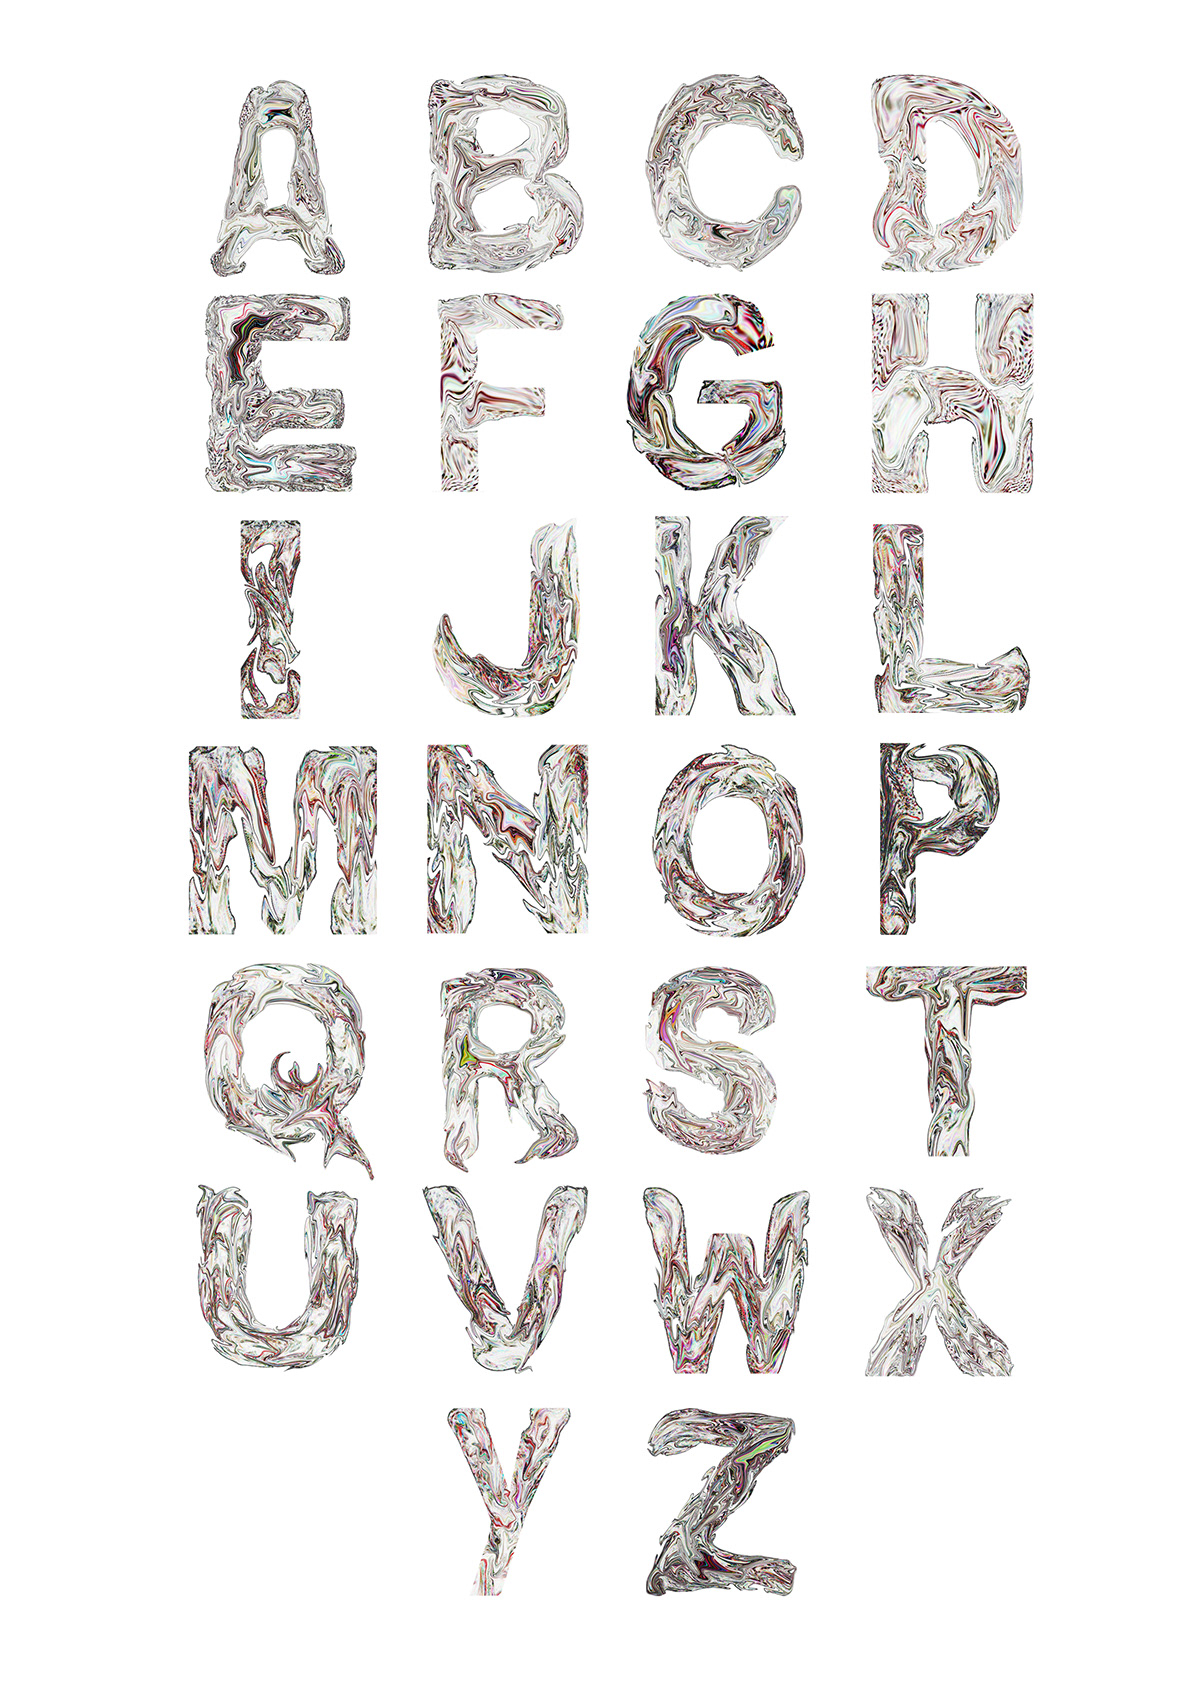 decay rotten rotting fruits Typeface warping letters